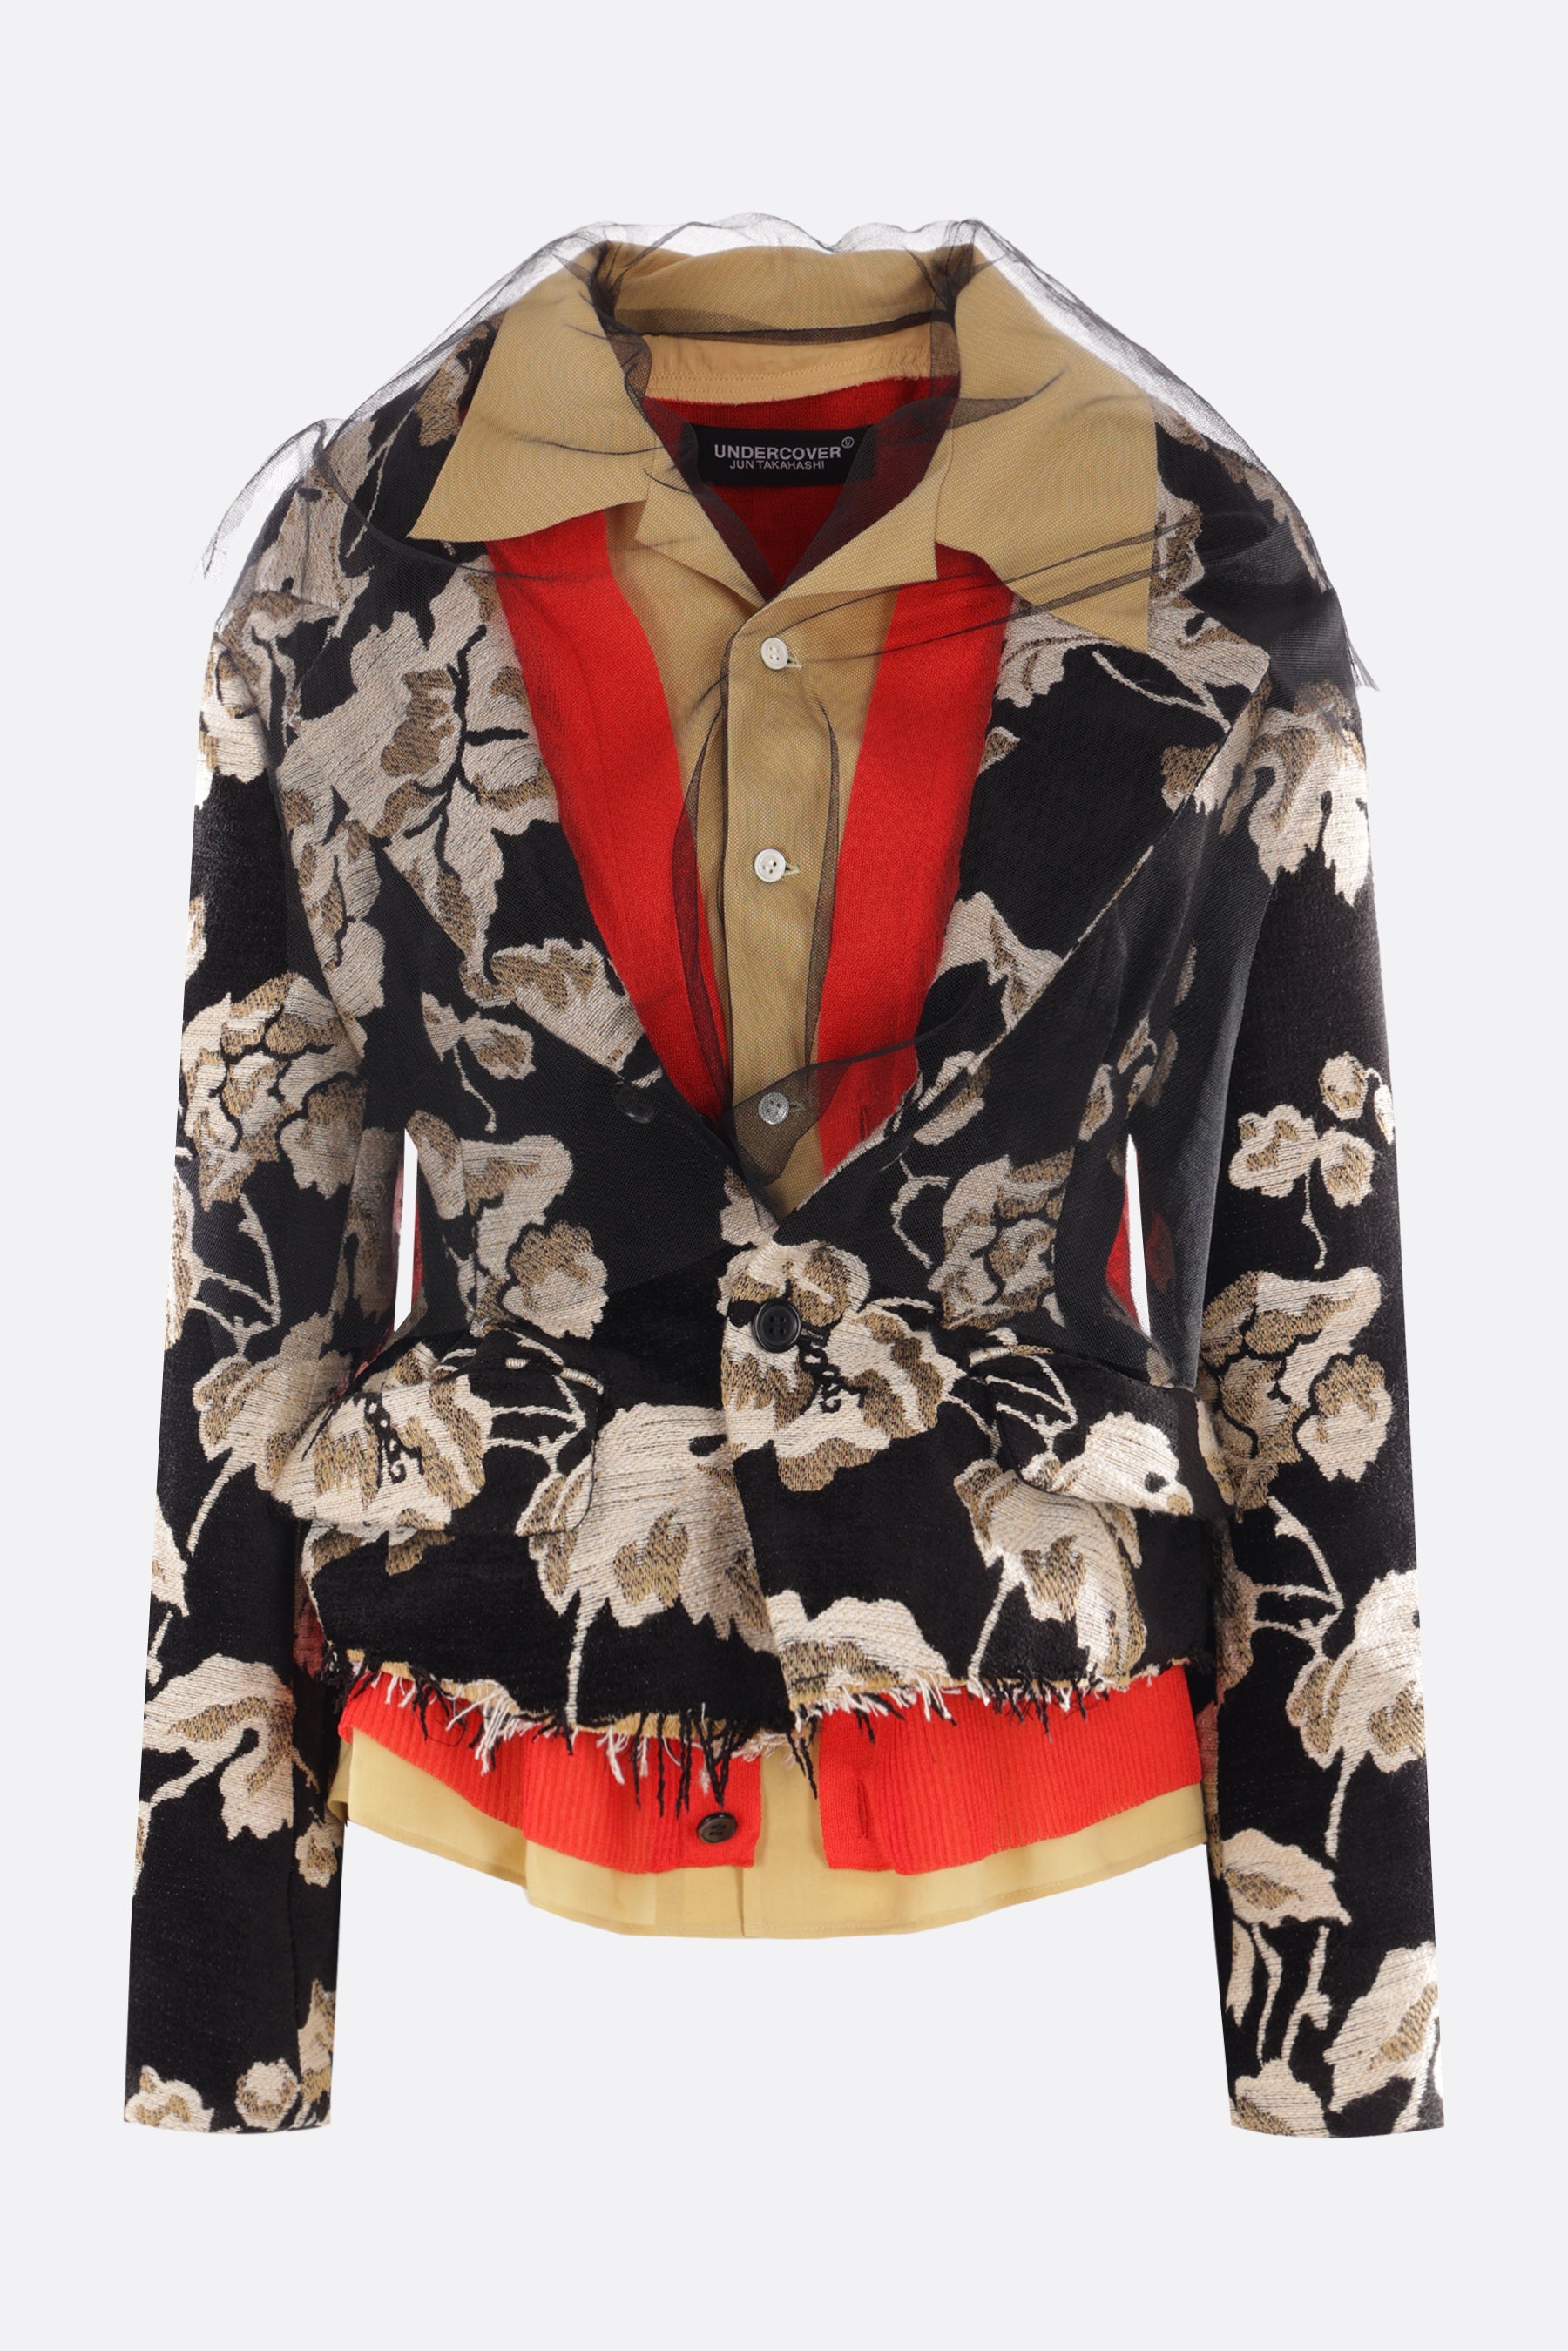 multi-layered jacket in jacquard, knit and poplin